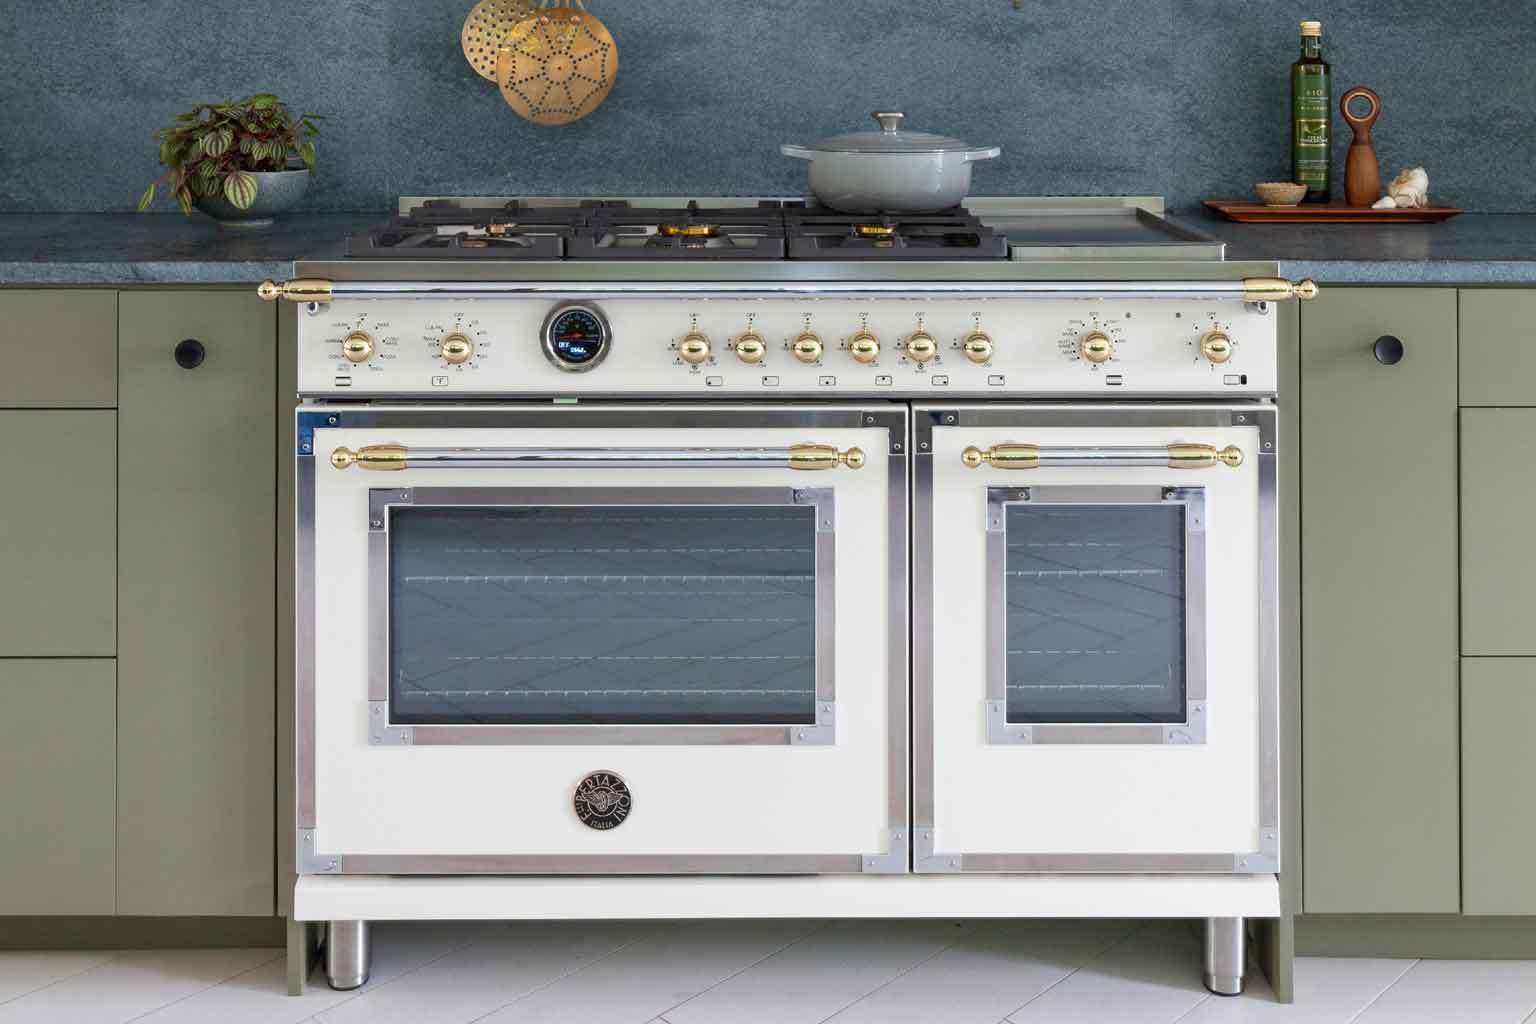 configurations-of-range-cookers